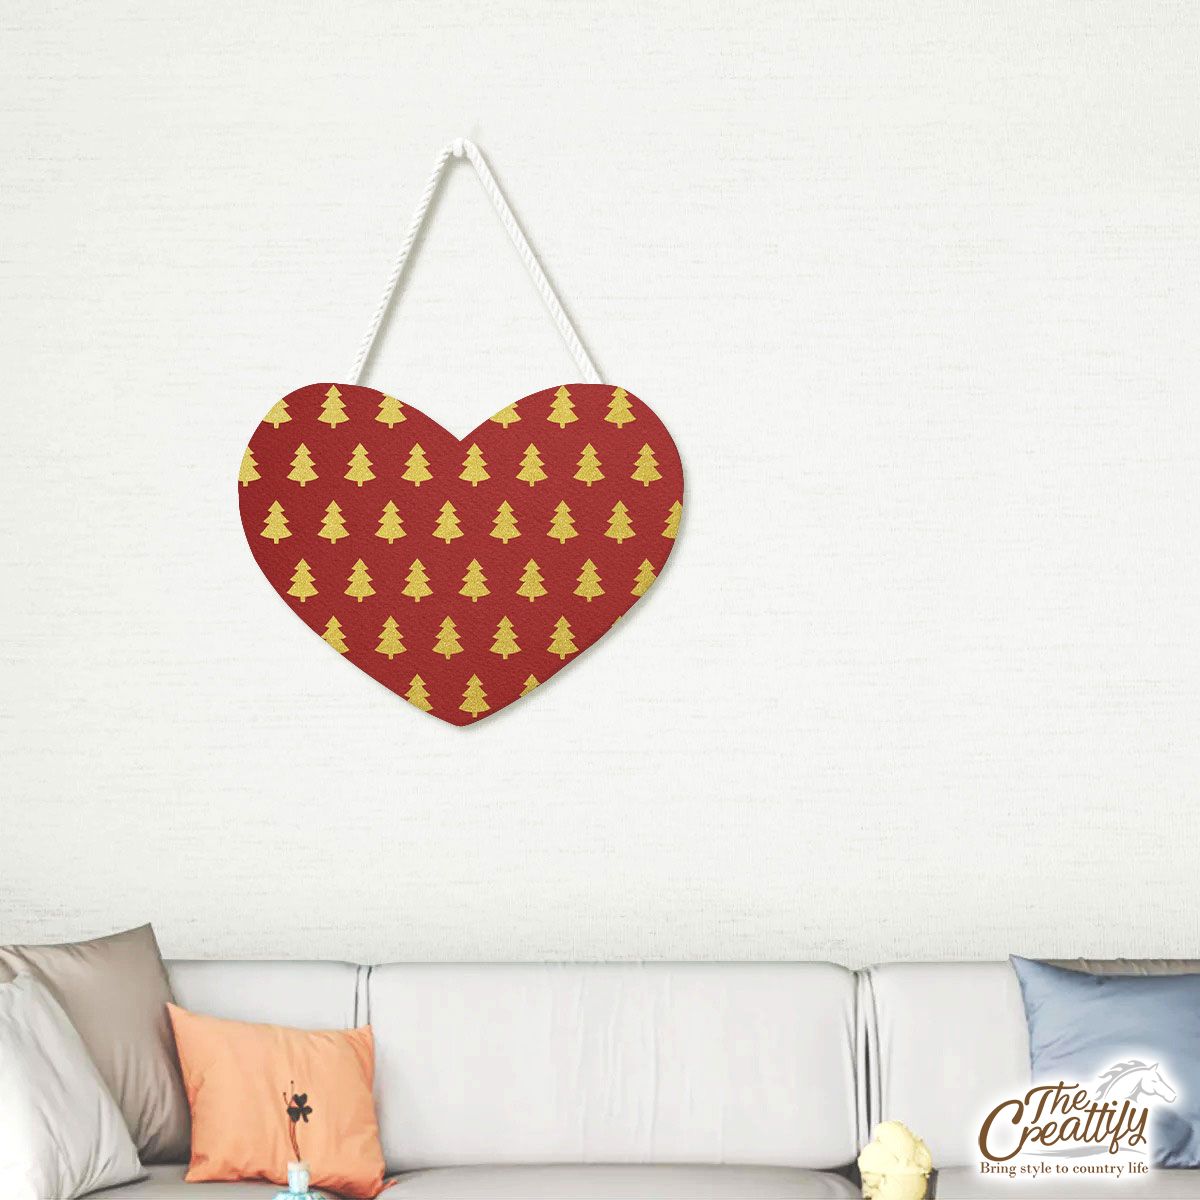 Christmas Tree, Christmas Tree Decorations, Pine Tree Pattern On Red Heart-Shaped Tablet